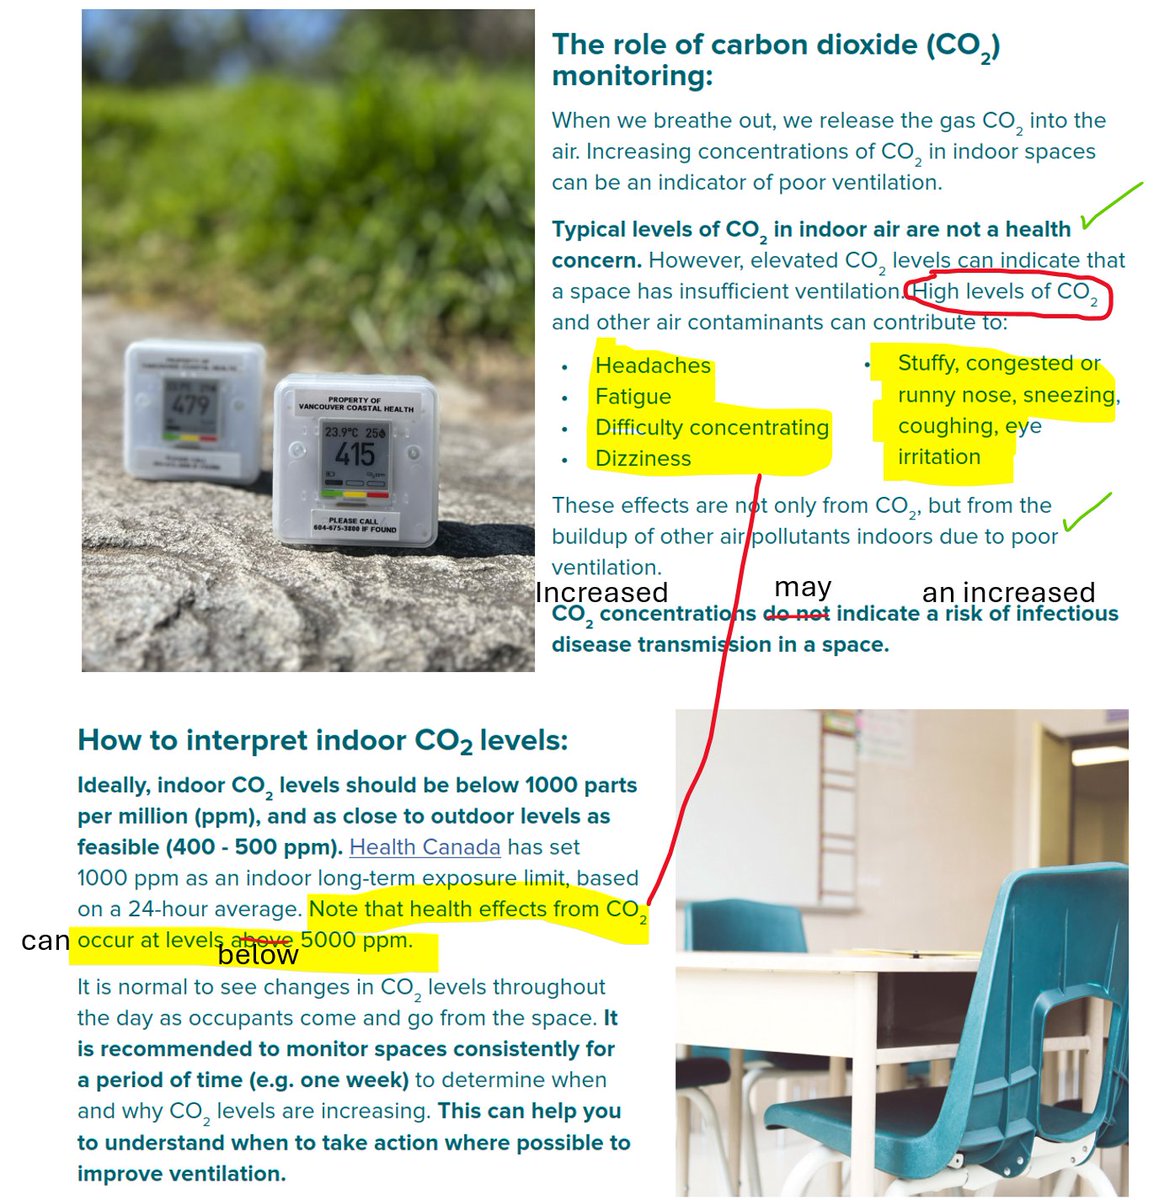 Vancouver Coastal Health has released an updated Ventilation and Indoor Air Quality resource for Schools and Childcare Facilities (vch.ca/en/document-li…) but their CO2 page needs some edits.